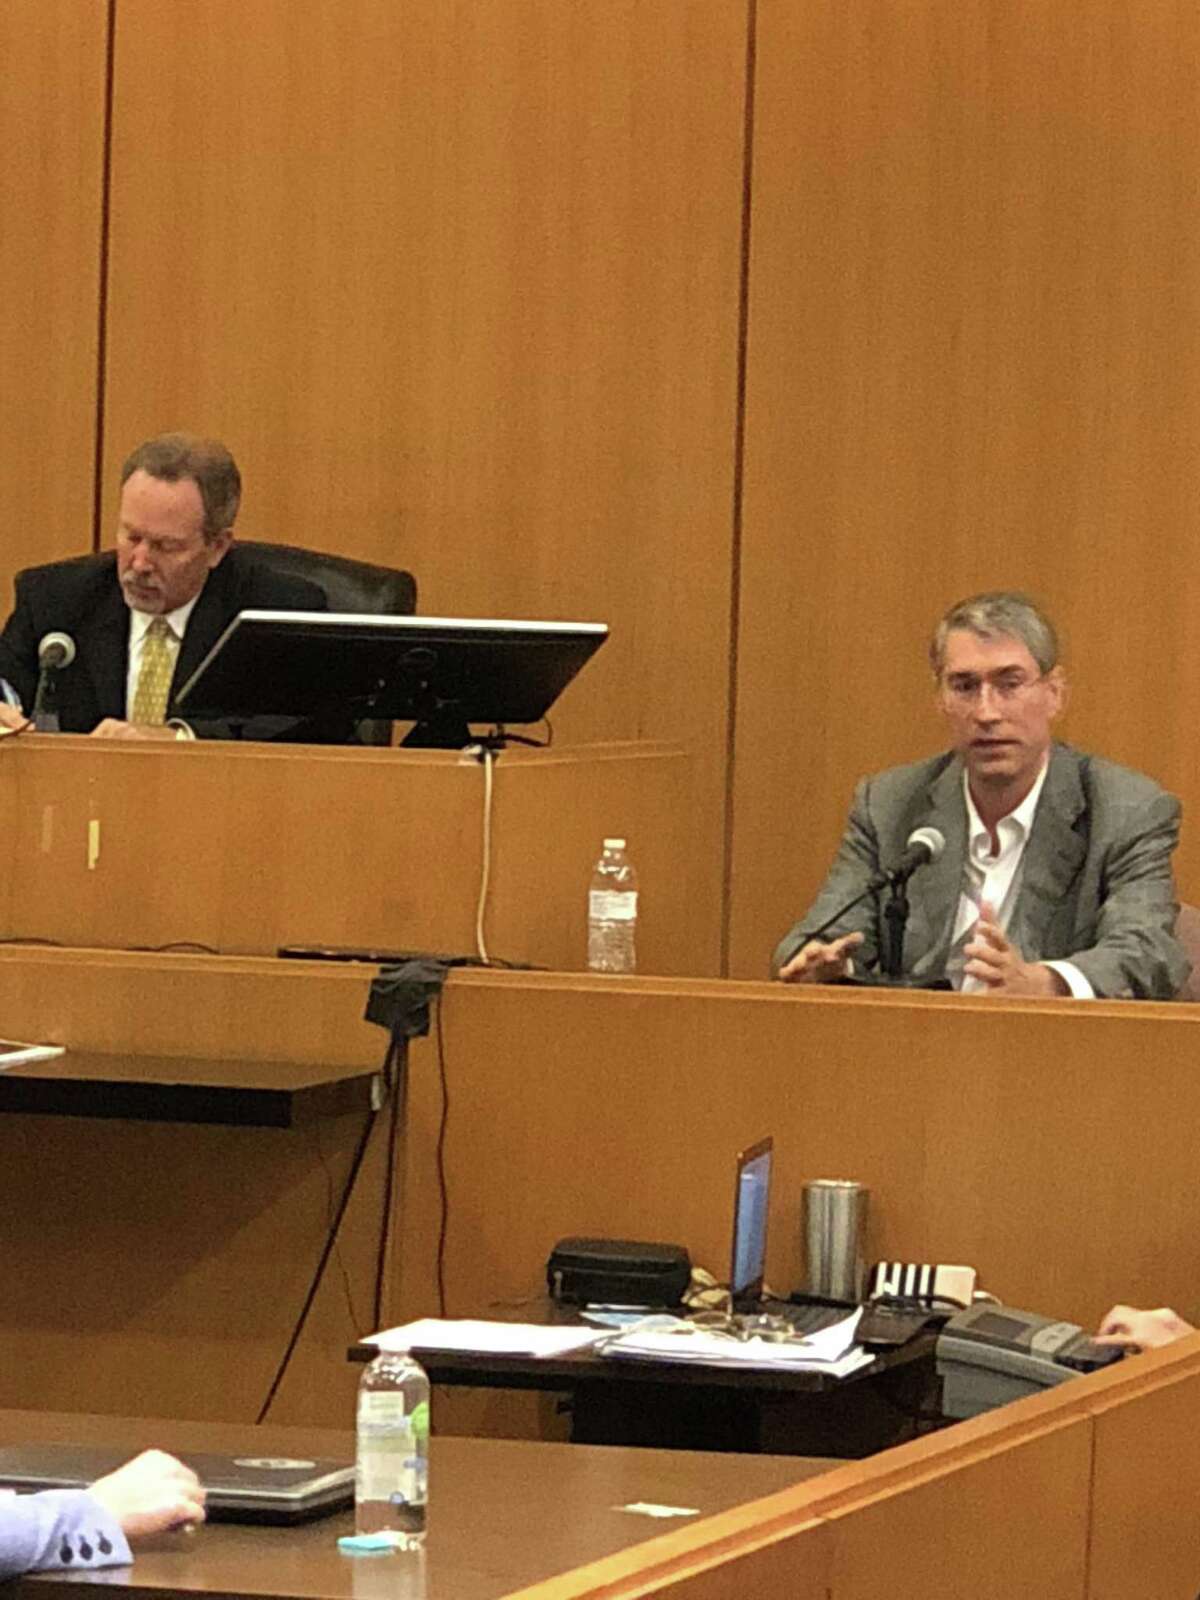 Preston Marshall, 45, took the stand in his own defense in his trial for misdemeanor assault, accused of head-butting and biting his wife during a fight in 2017. >>Find out how Anna Nicole Smith's life intersected with the Marshall family in this timeline of her life...